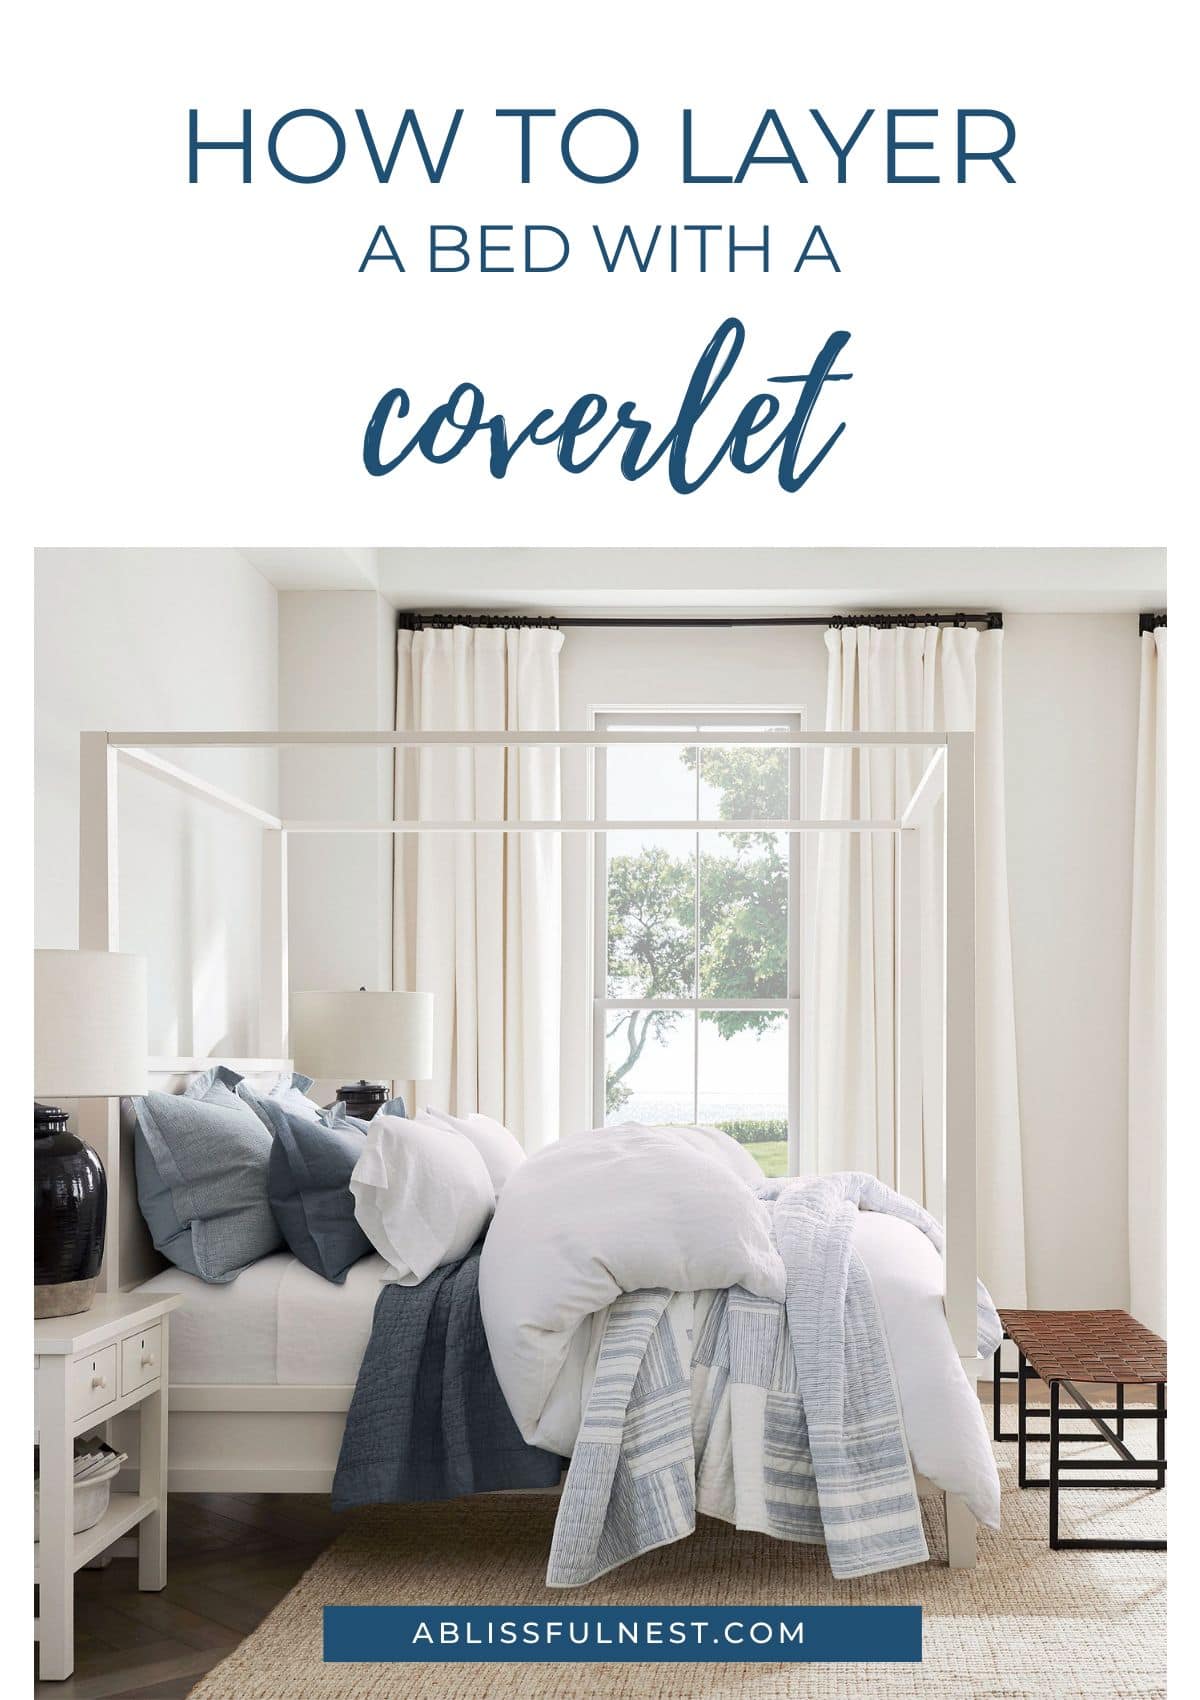 white bed, navy and light blue bedding, leather bench at end of bed